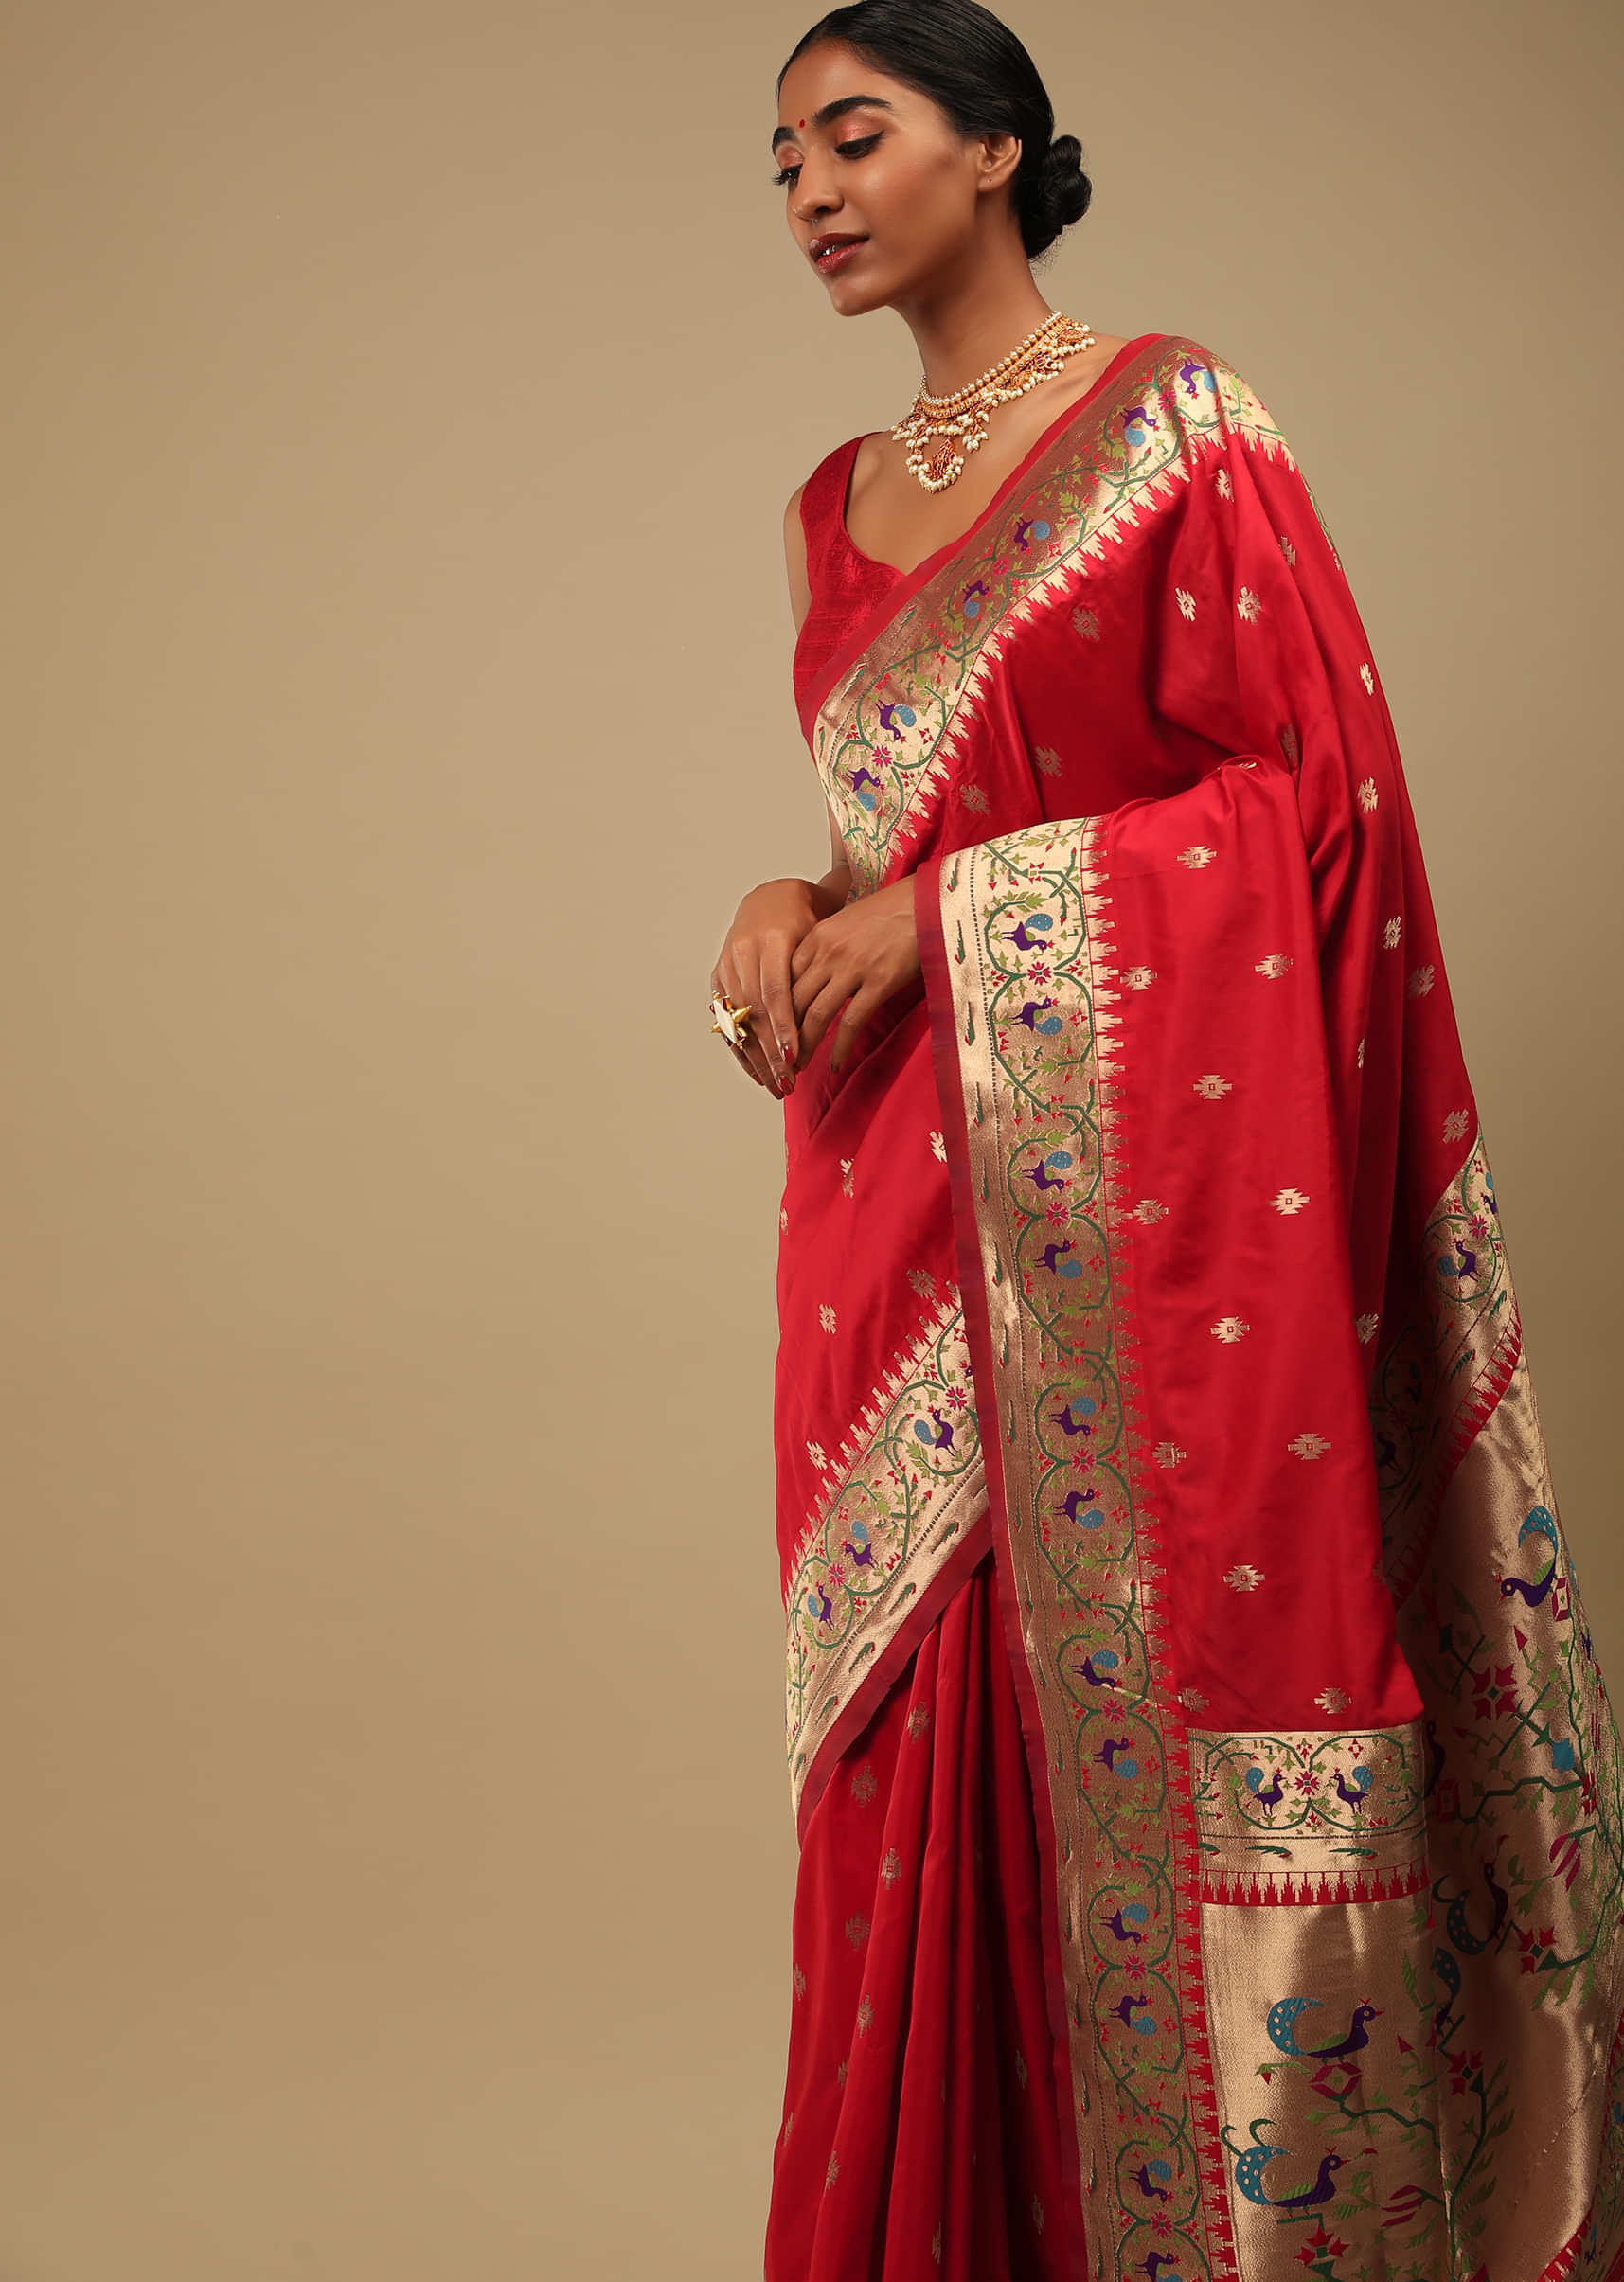 Bright Red Saree In Art Handloom Silk With Woven Geometric Buttis, Peacock Motifs On The Border And Unstitched Blouse  